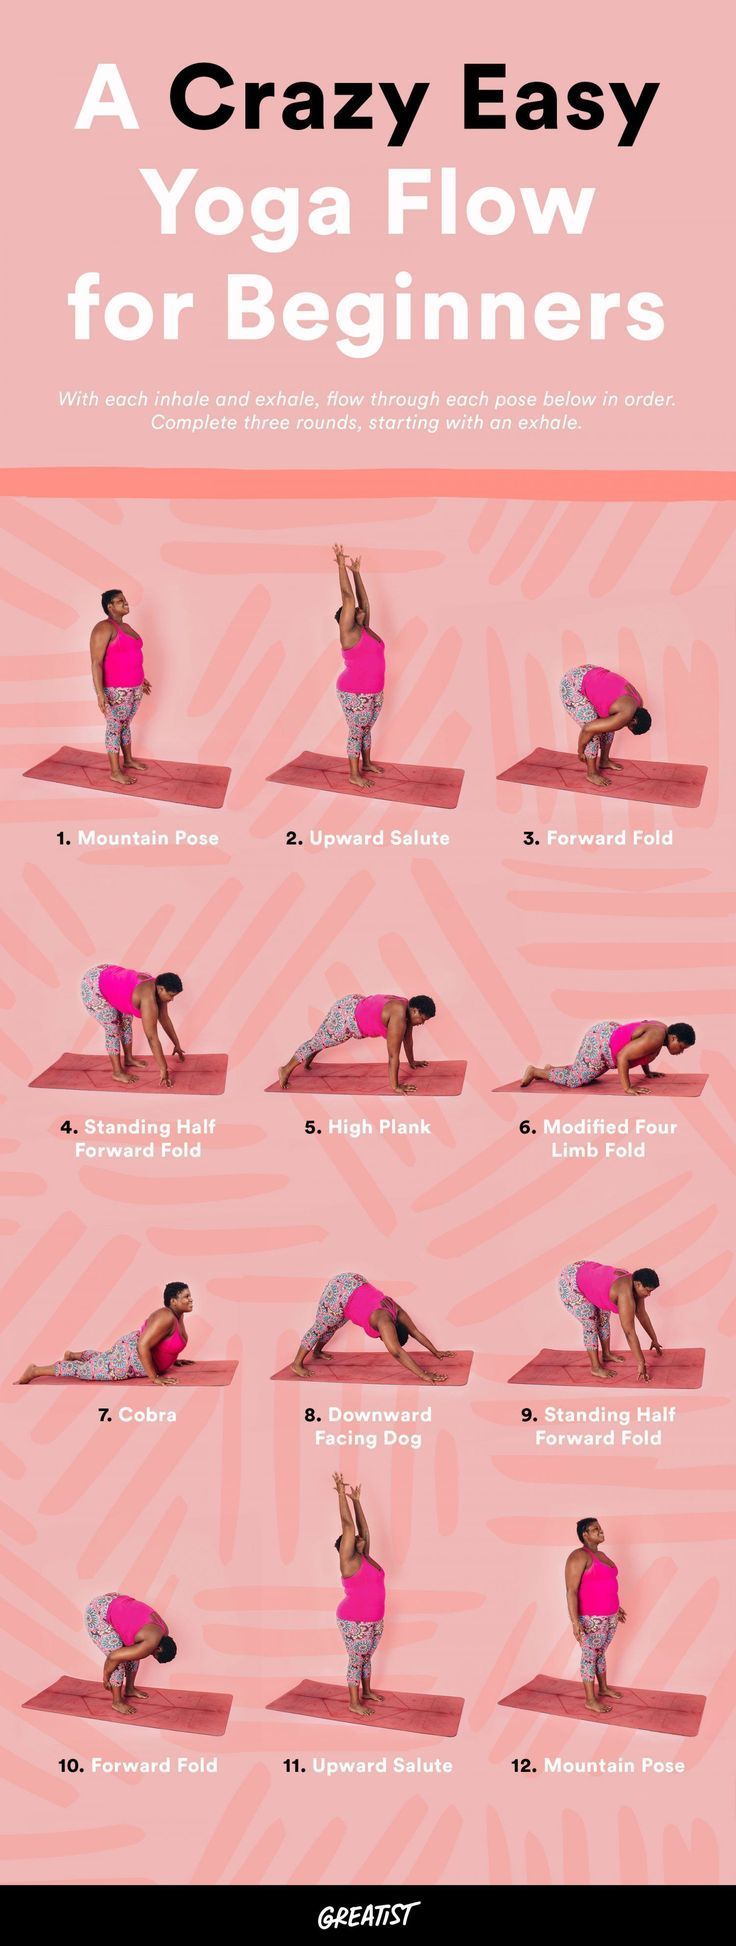 Jessamyn Stanley Shares 12 Easy Yoga Poses for Beginners -   24 fitness yoga to get
 ideas